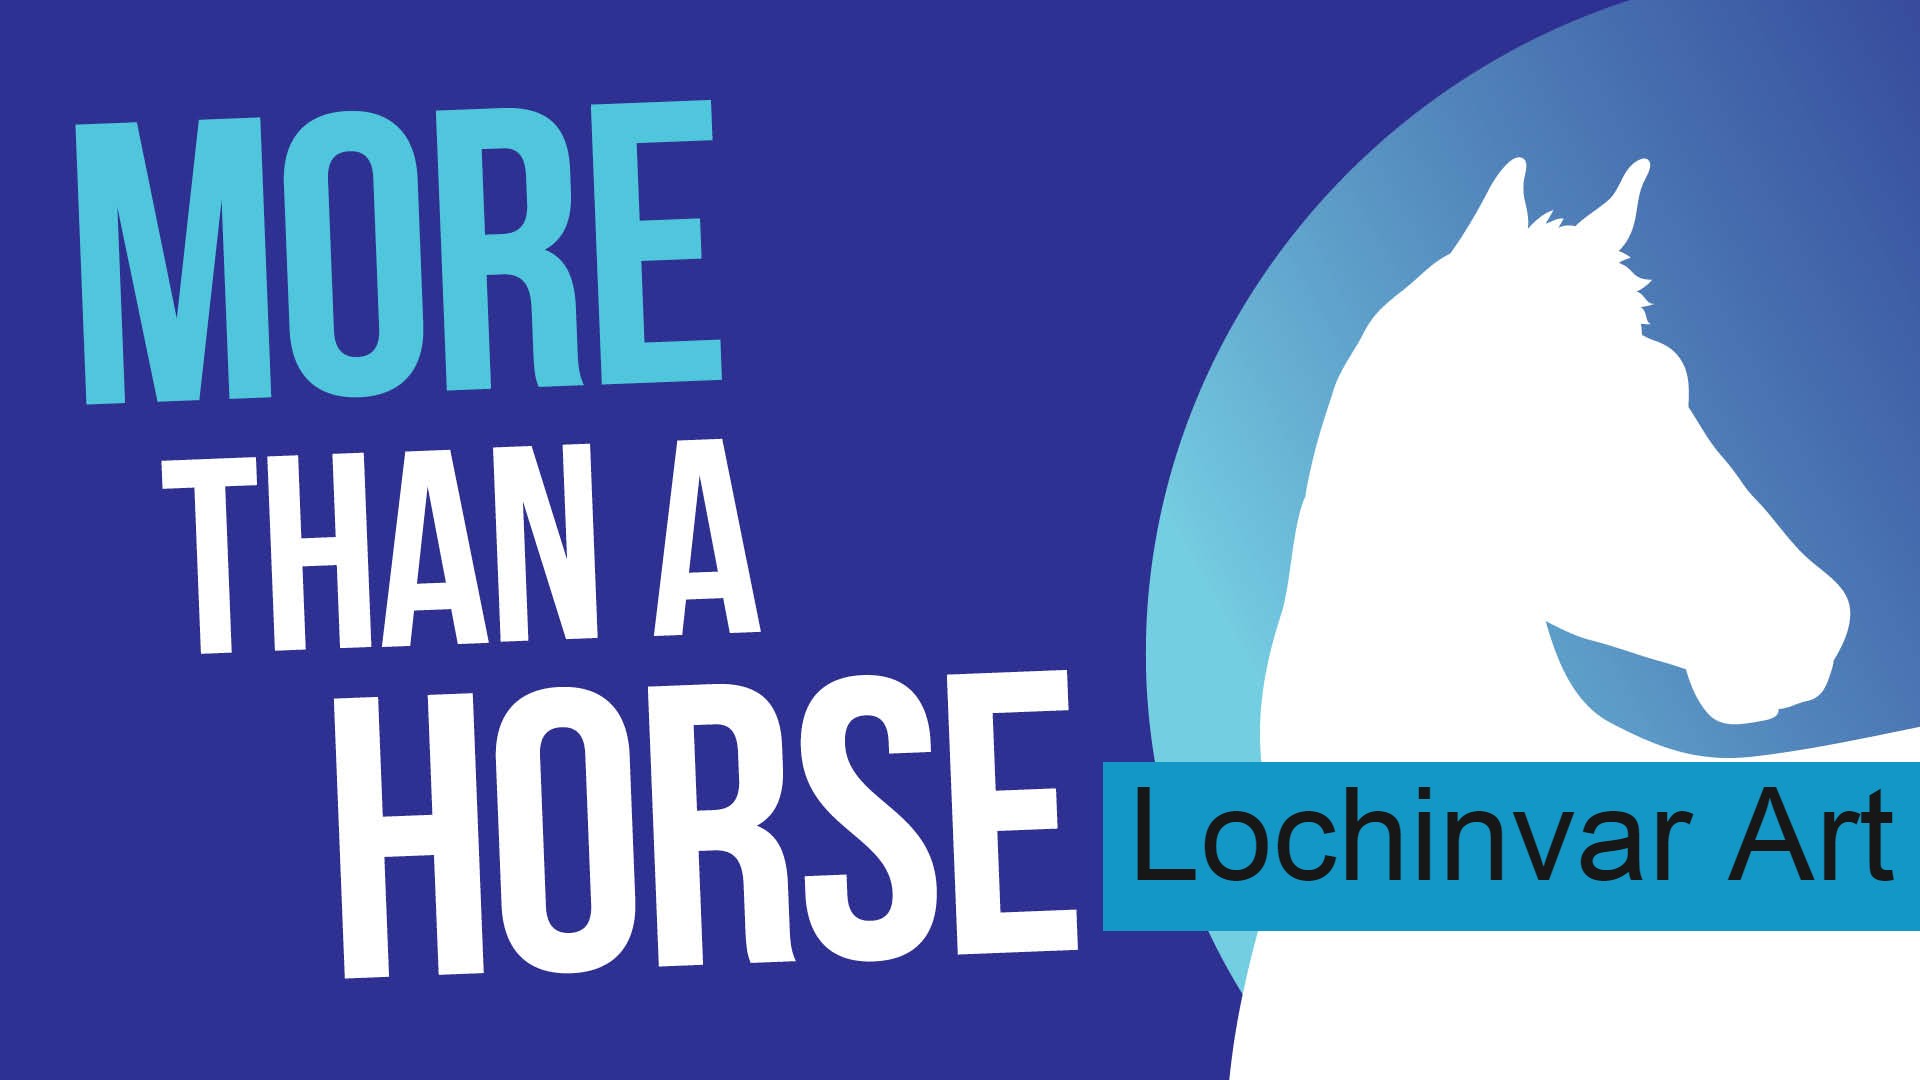 You are currently viewing 41: More Than A Horse – Lochinvar Art